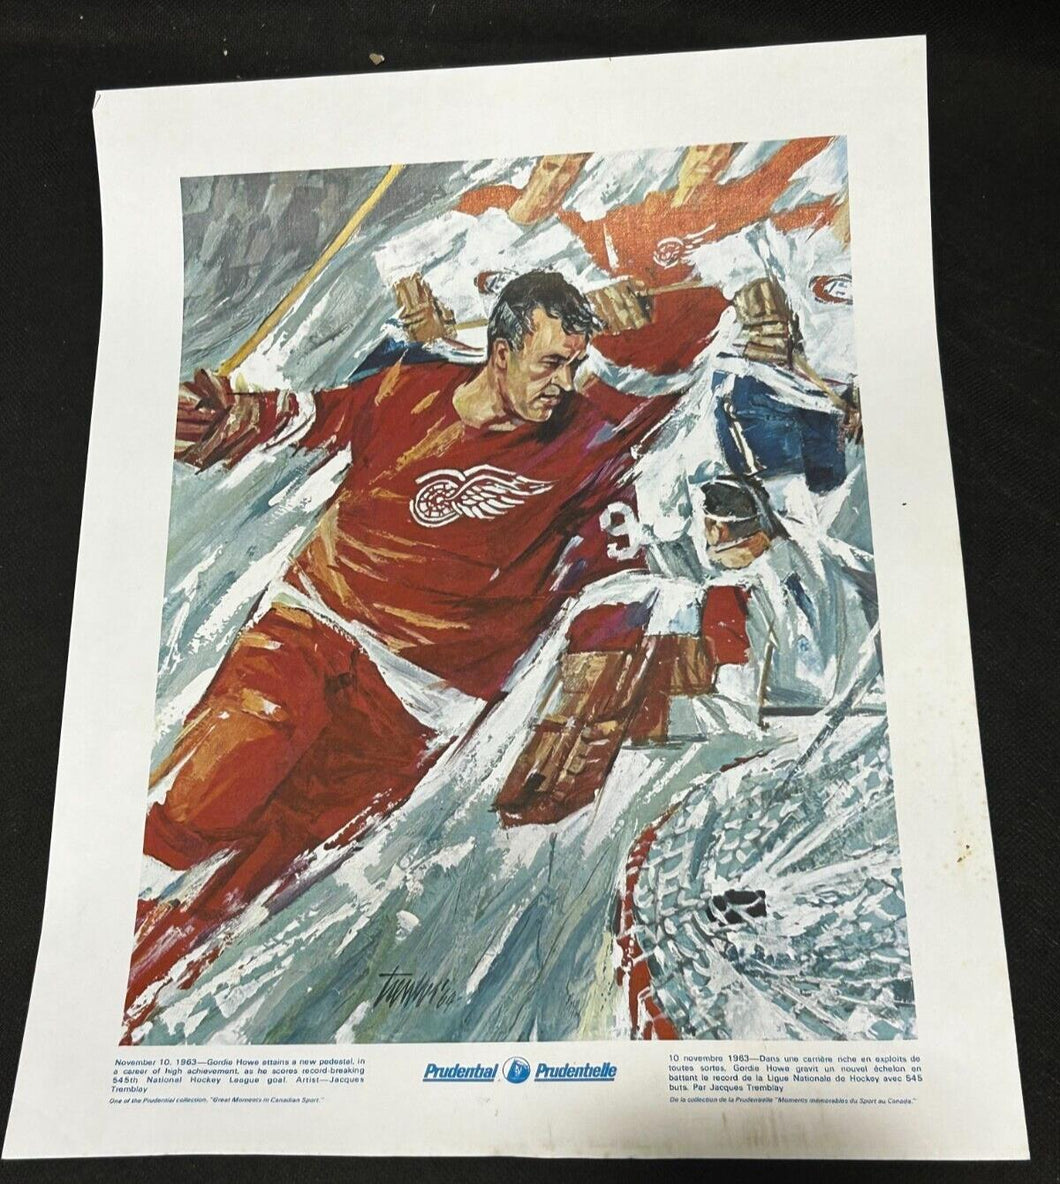 Prudential Grand Moments CDN Sports Gordie Howe. Poster EX+